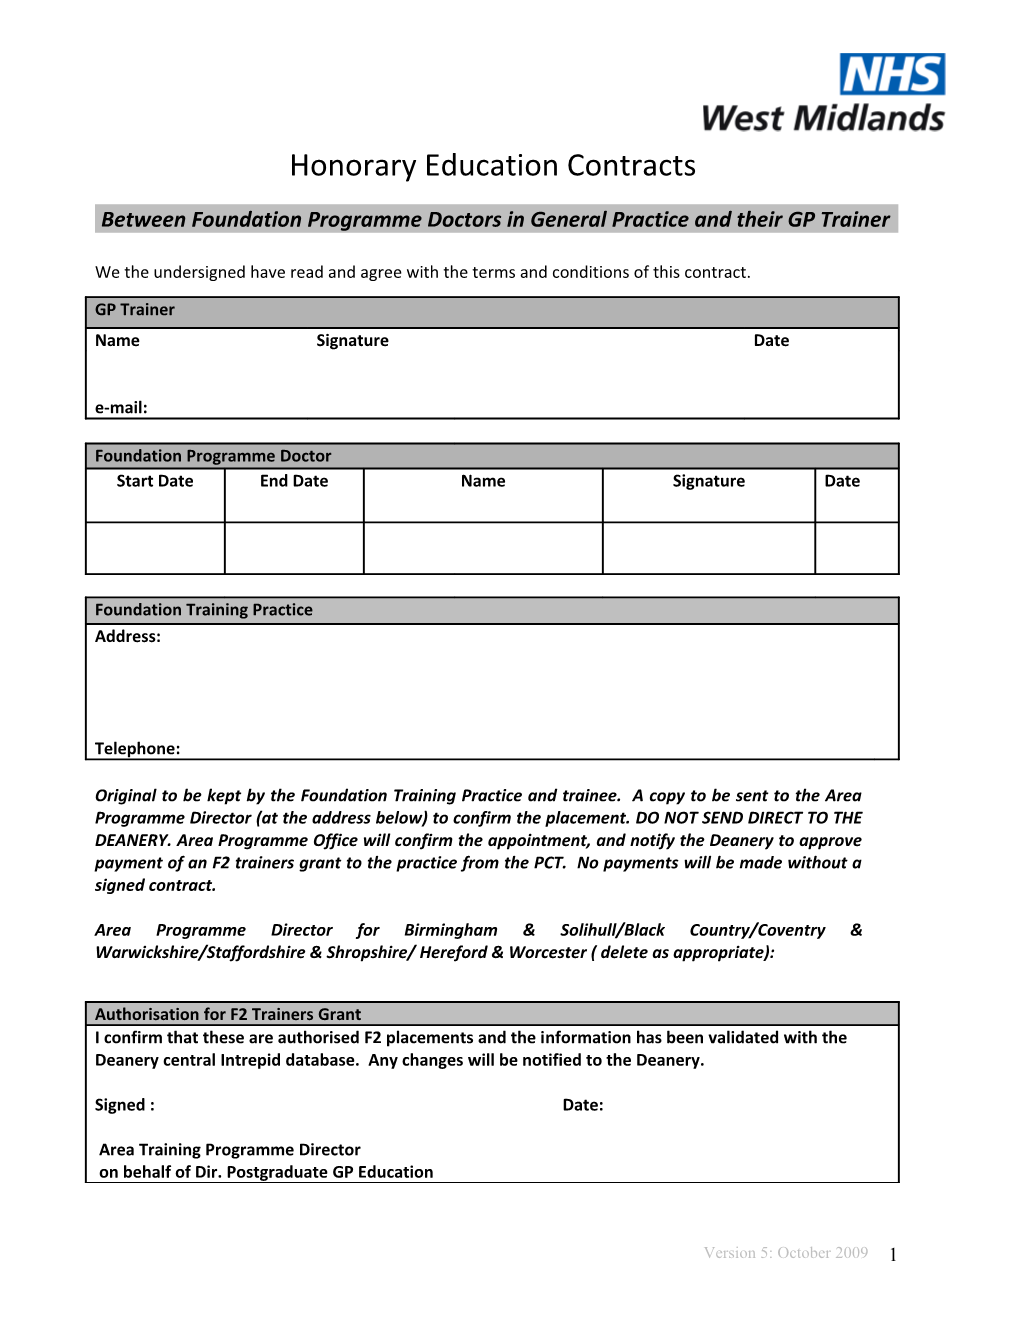 Honorary Education Contract